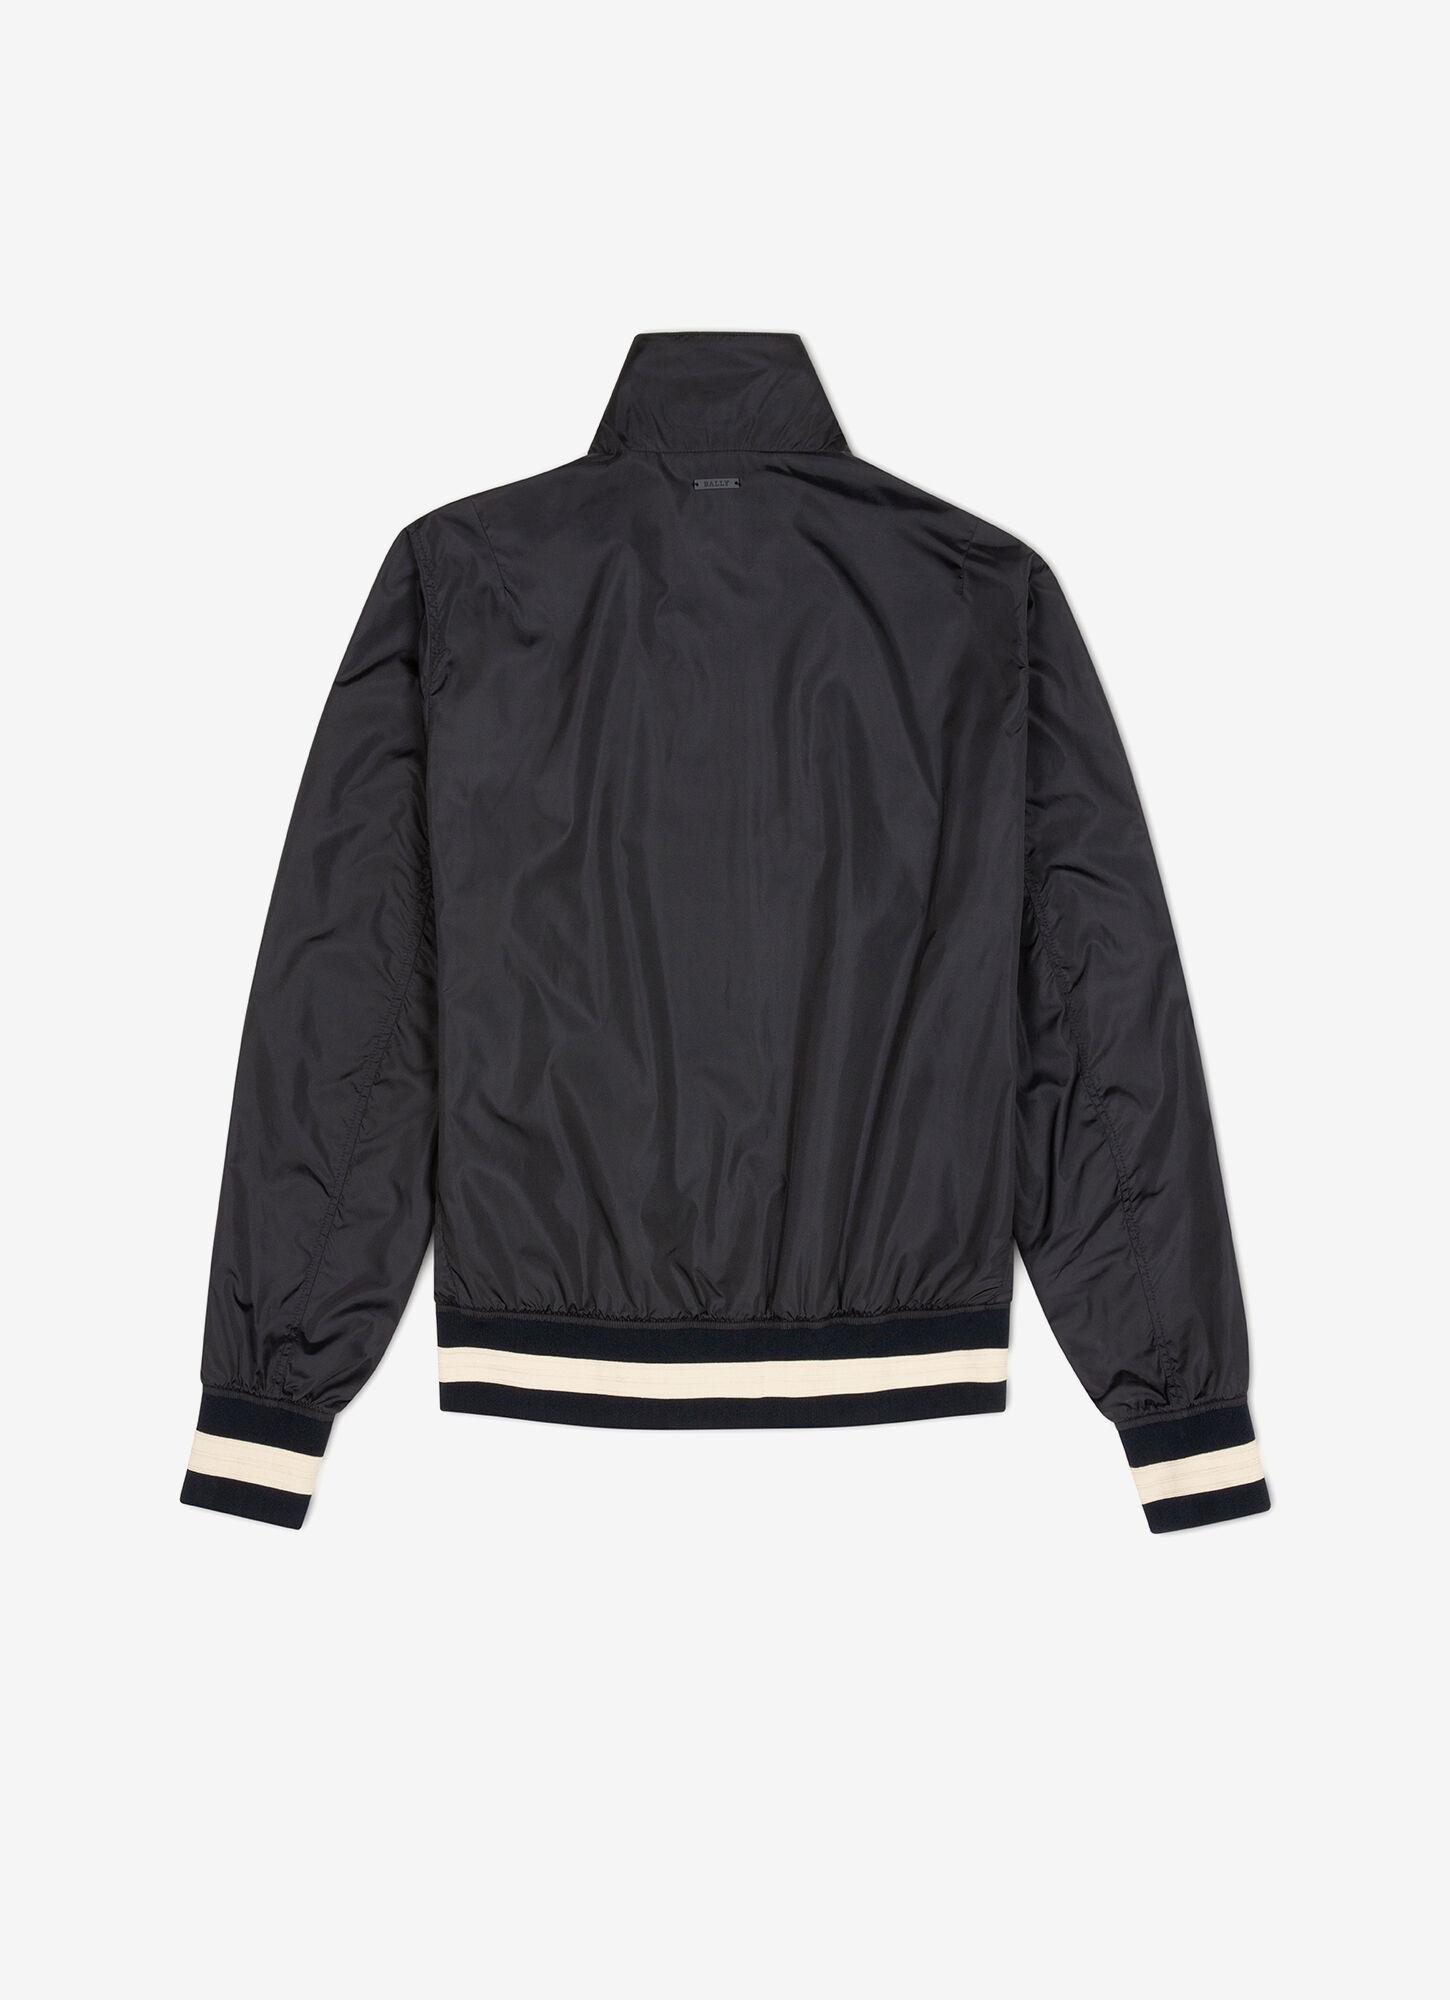 Bally Synthetic Bomber Jacket in Blue for Men - Lyst